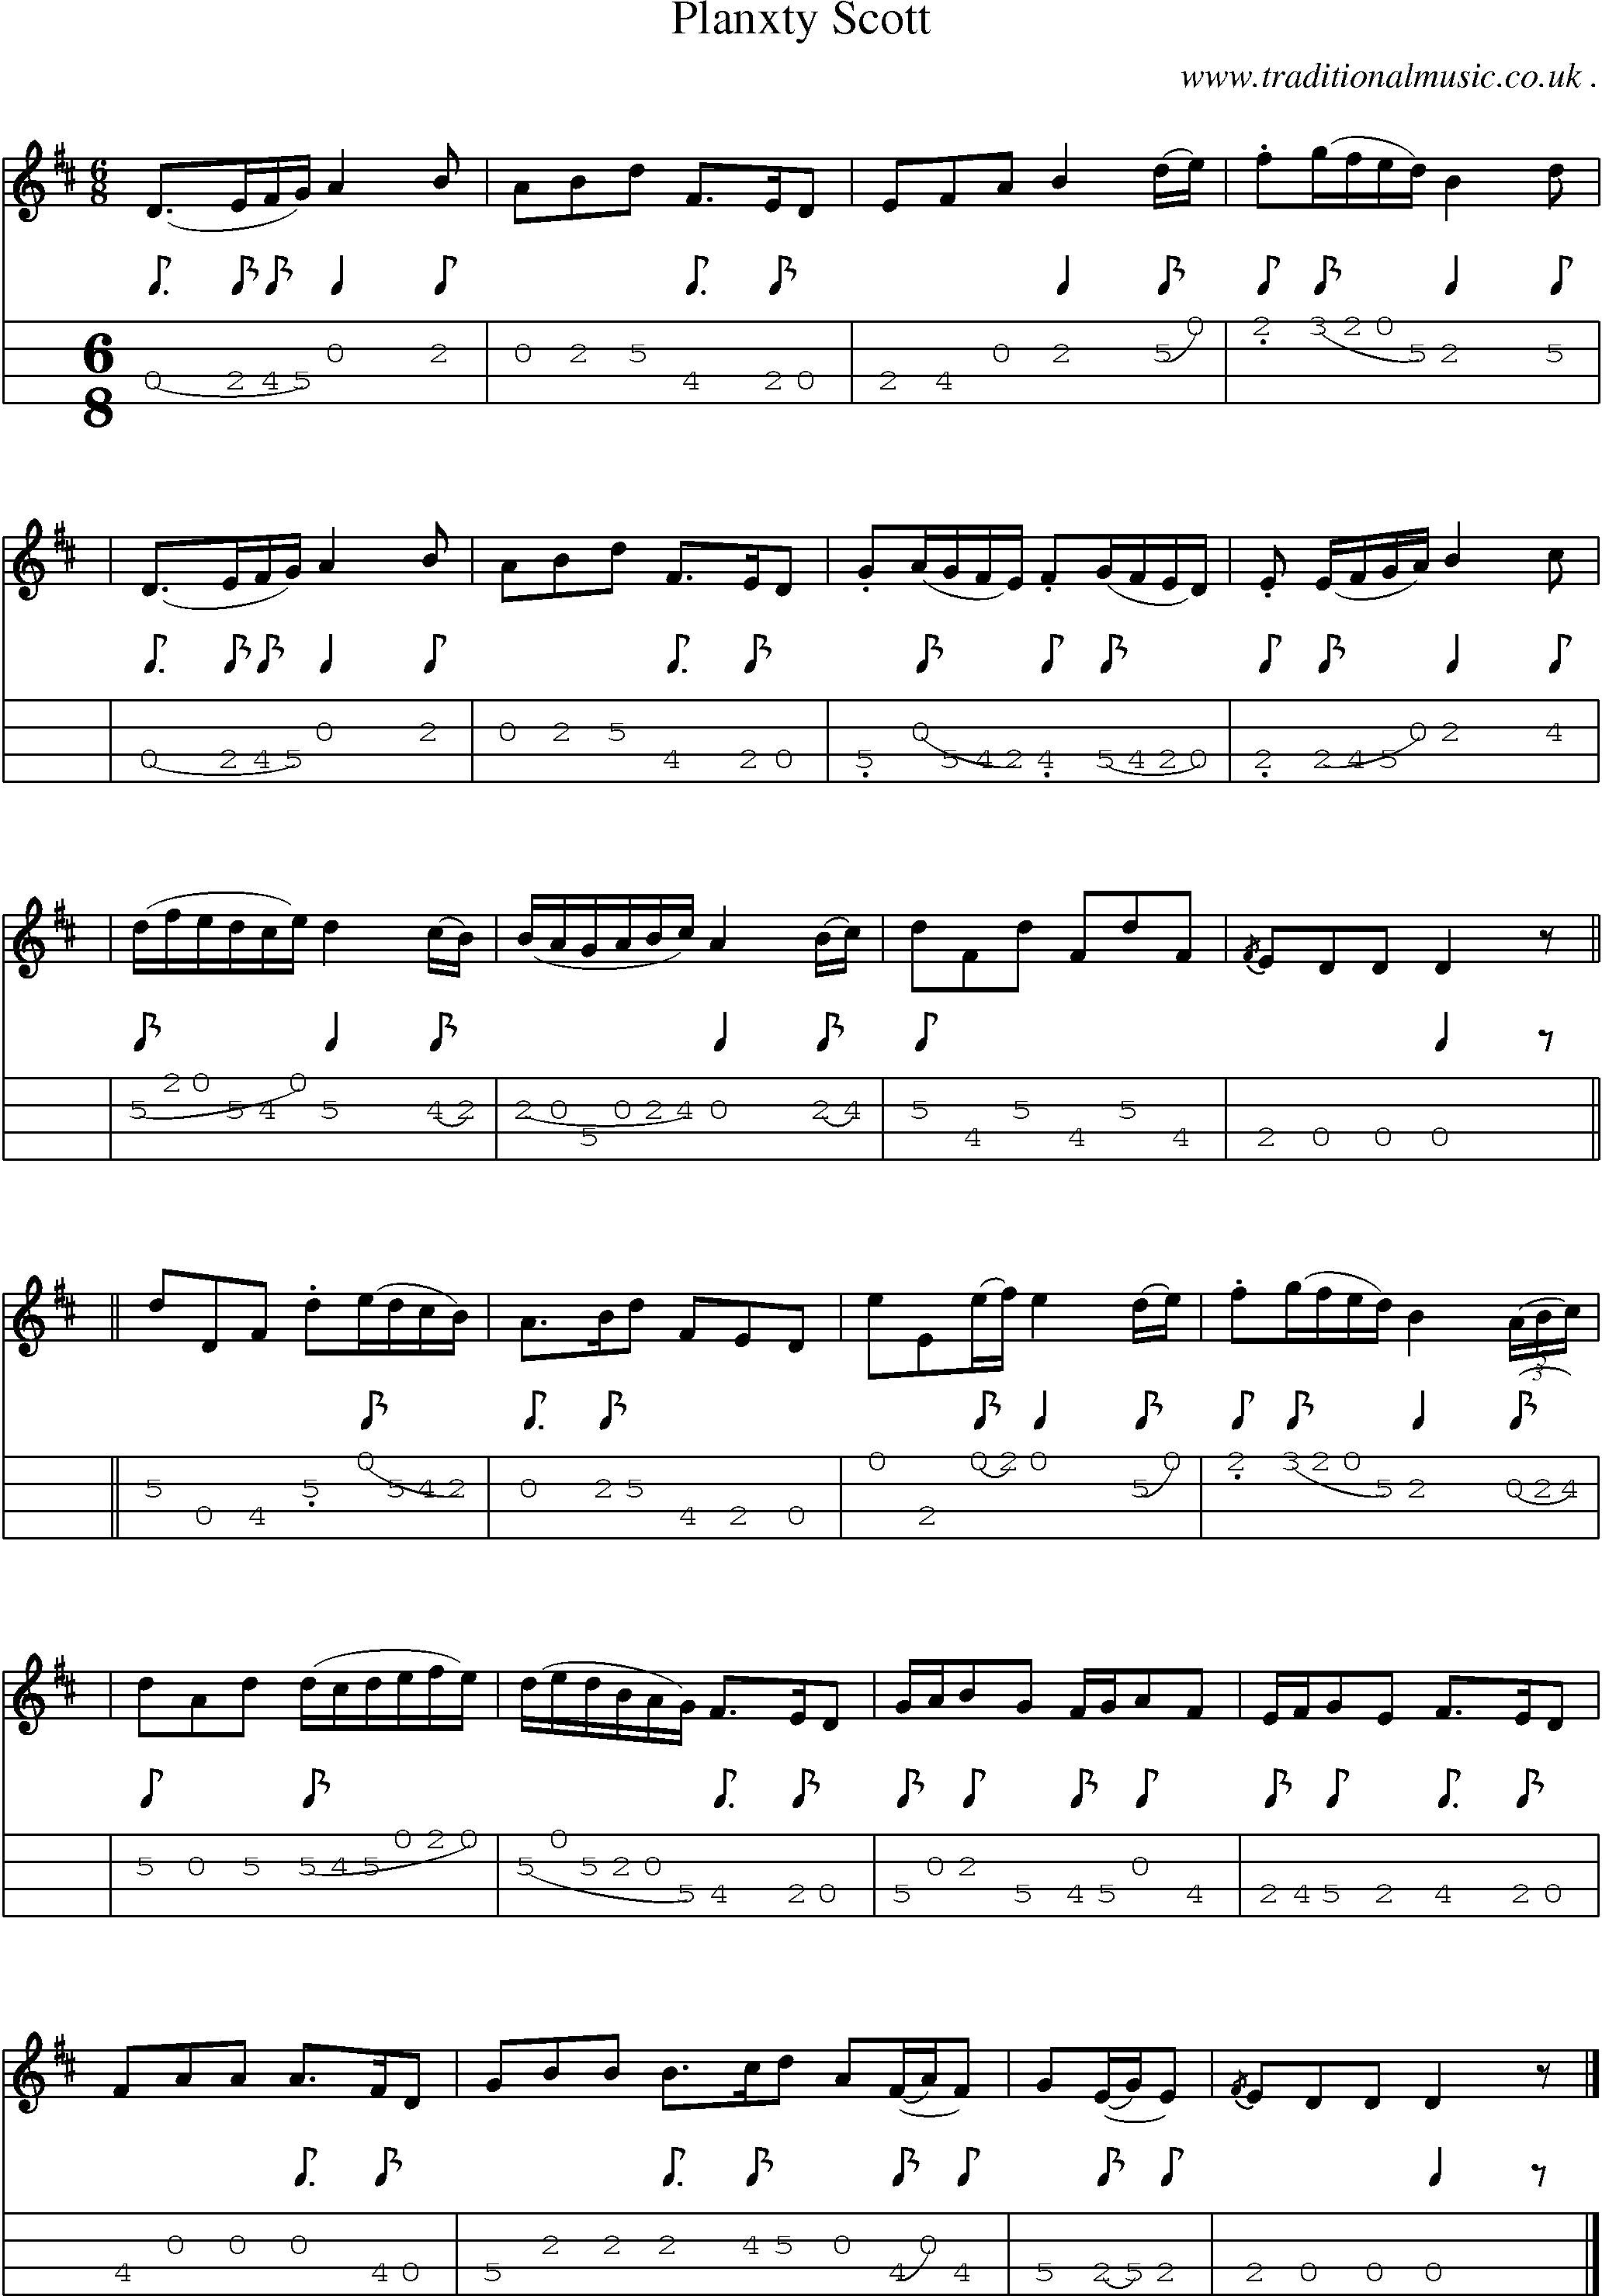 Sheet-music  score, Chords and Mandolin Tabs for Planxty Scott